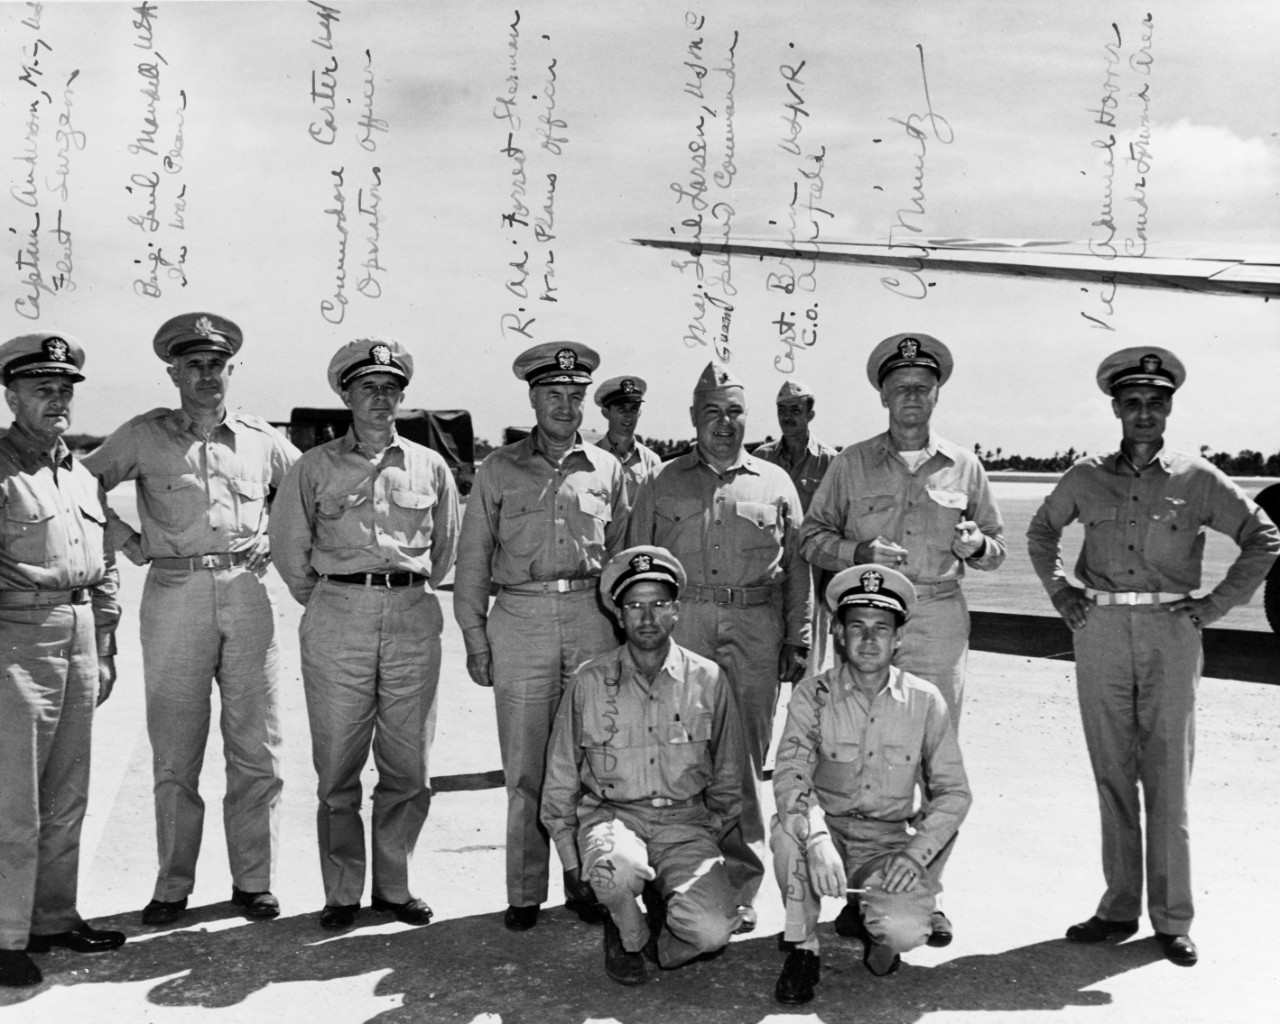 Fleet Admiral Chester W. Nimitz (CINCPAC-POA) arrives at his advanced headquarters at Guam, 27 January 1945, with part of his staff. L to R: Capt. T.C. Anderson (fleet surgeon); BGEN. H.C. Mandell, USA (war plans); COMMO. W.R. Carter, USN (Oper. Off.); RADM Forrest Sherman (war plans); UNIDENT. Off.; MGEN. N.L. Larsen, USMC (Guam Is. CDR.); CAPT. Brimm, USNR (C.O. Airfield Rear); FADM Nimitz; VADM J.H. Hoover, USN (CDR, Forward Area). Kneeling, L to R: LCDR. Horne and CDR. H.A. Lamar, USNR. The handwriting in FADM Nimitz's.